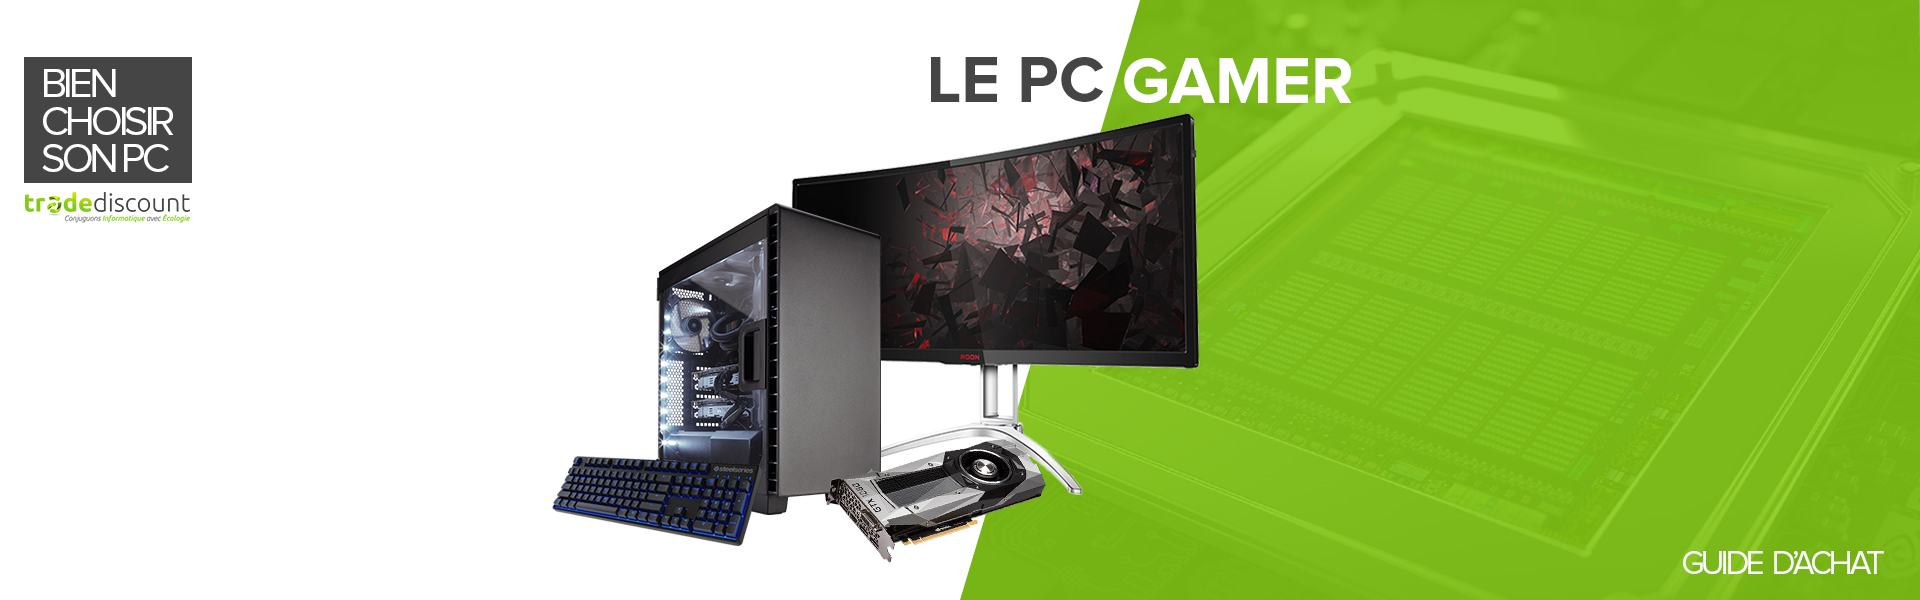 Guide Complet : Choisir son PC gamer - Netione ®